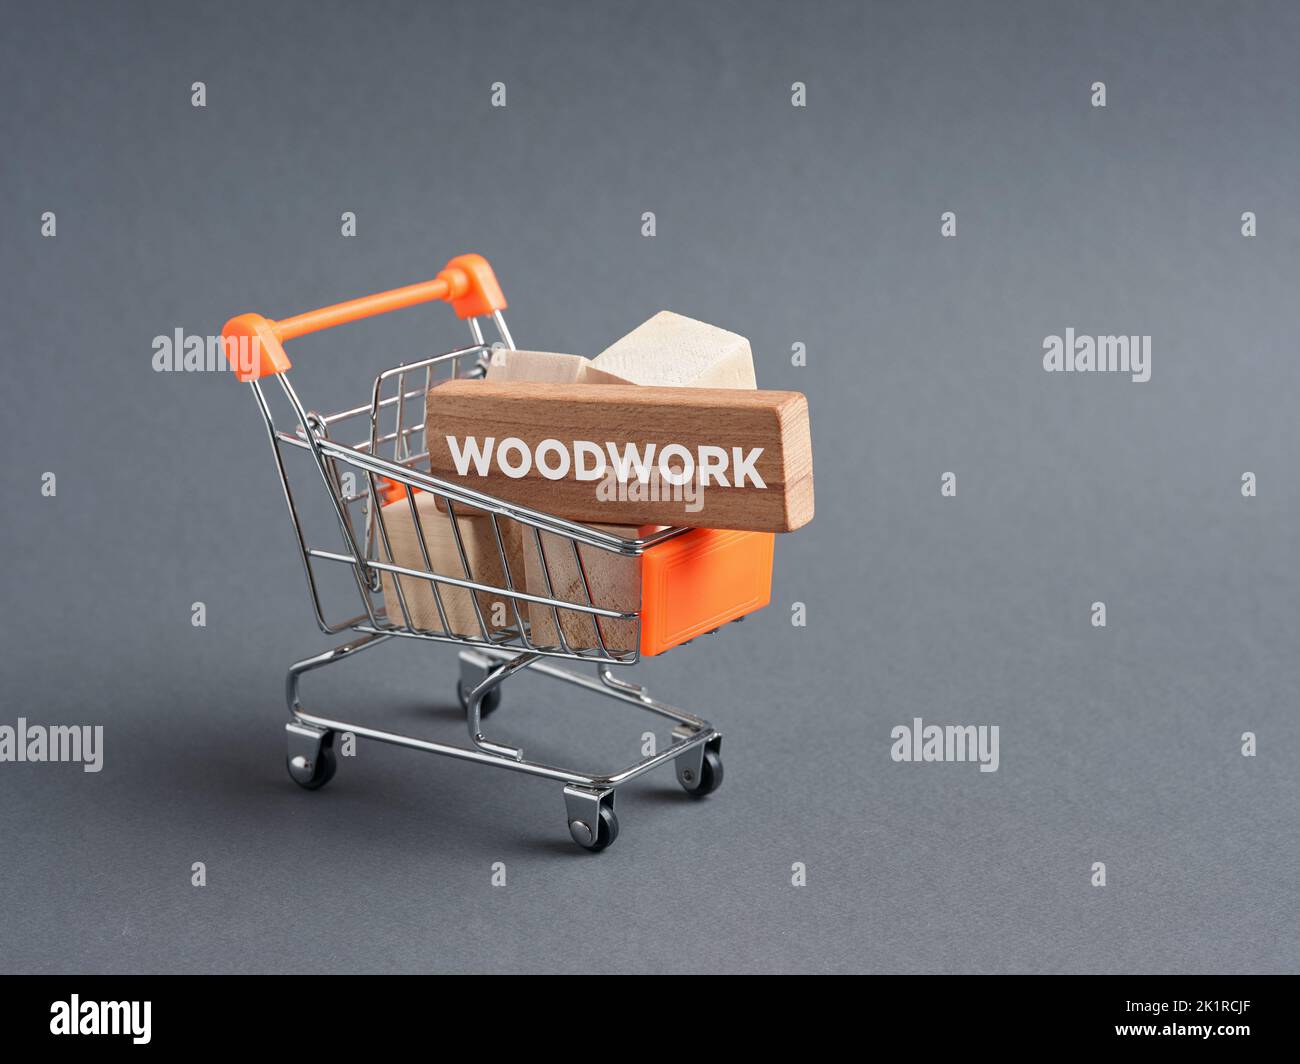 Wooden blocks and cubes in shopping cart or trolley. Shopping for woodwork. Buying timber from the market, DIY raw material. Stock Photo